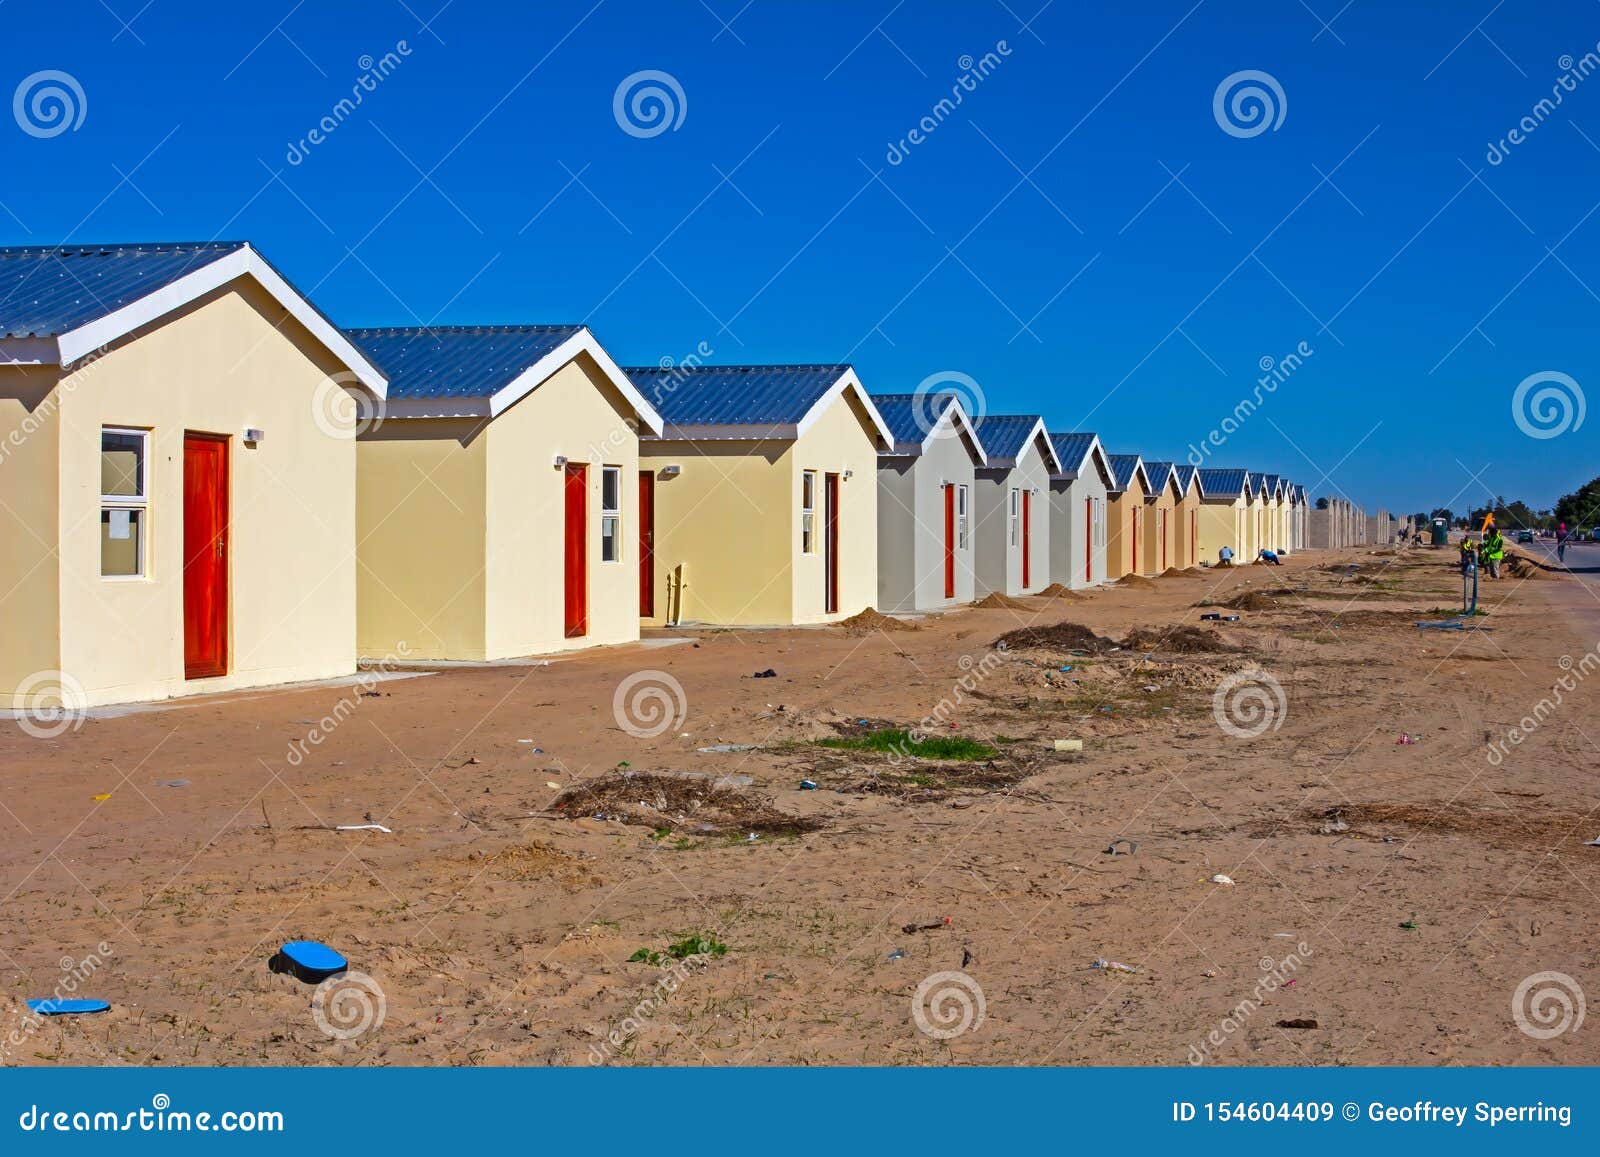 Low cost RDP Homes Under Construction Stock Image Image 